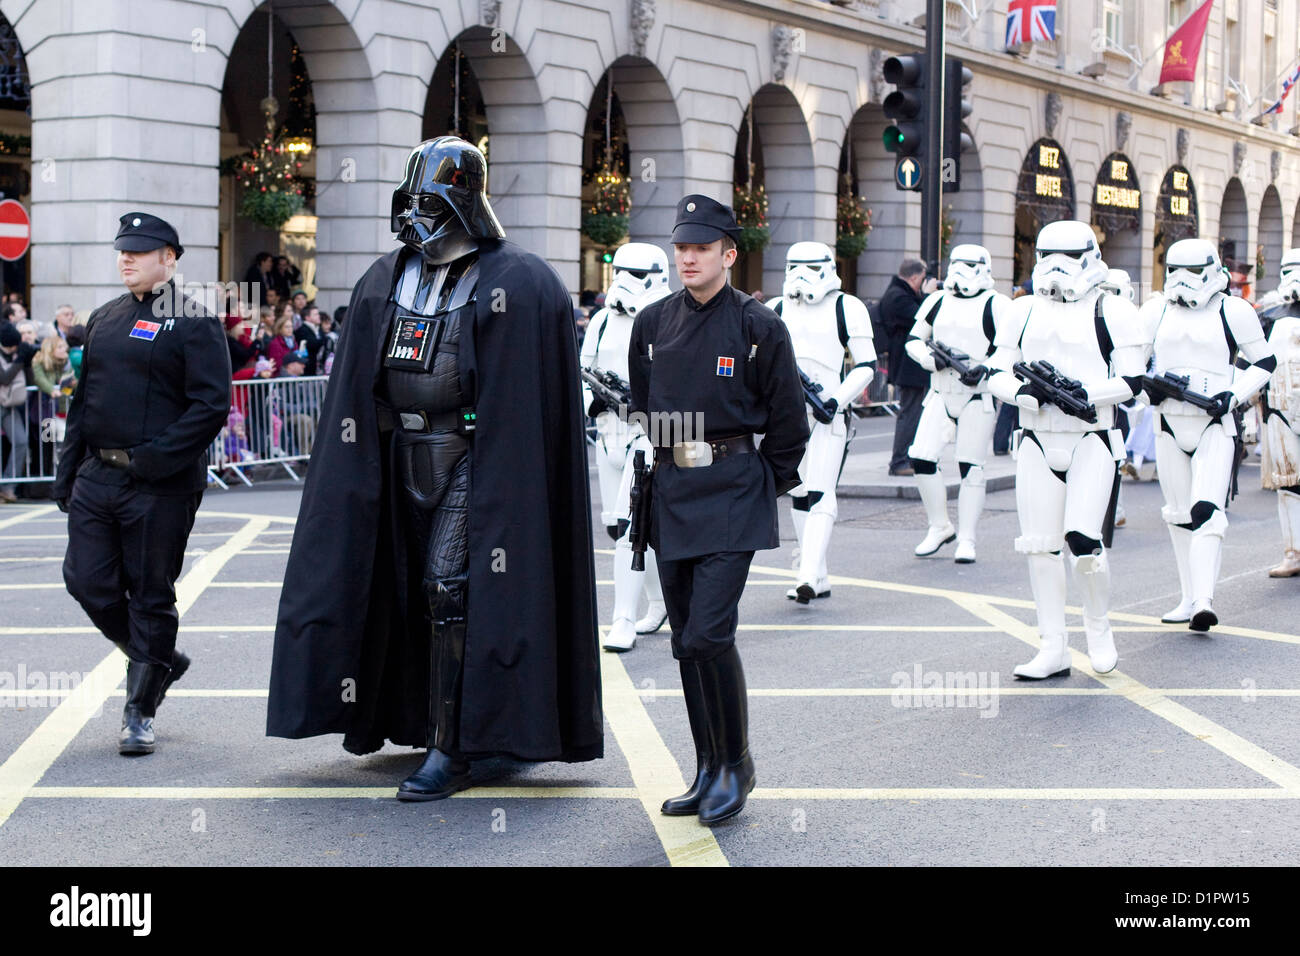 Kings Parade Gallery: Fans, players, and Darth Vader celebrate together -  NBC Sports